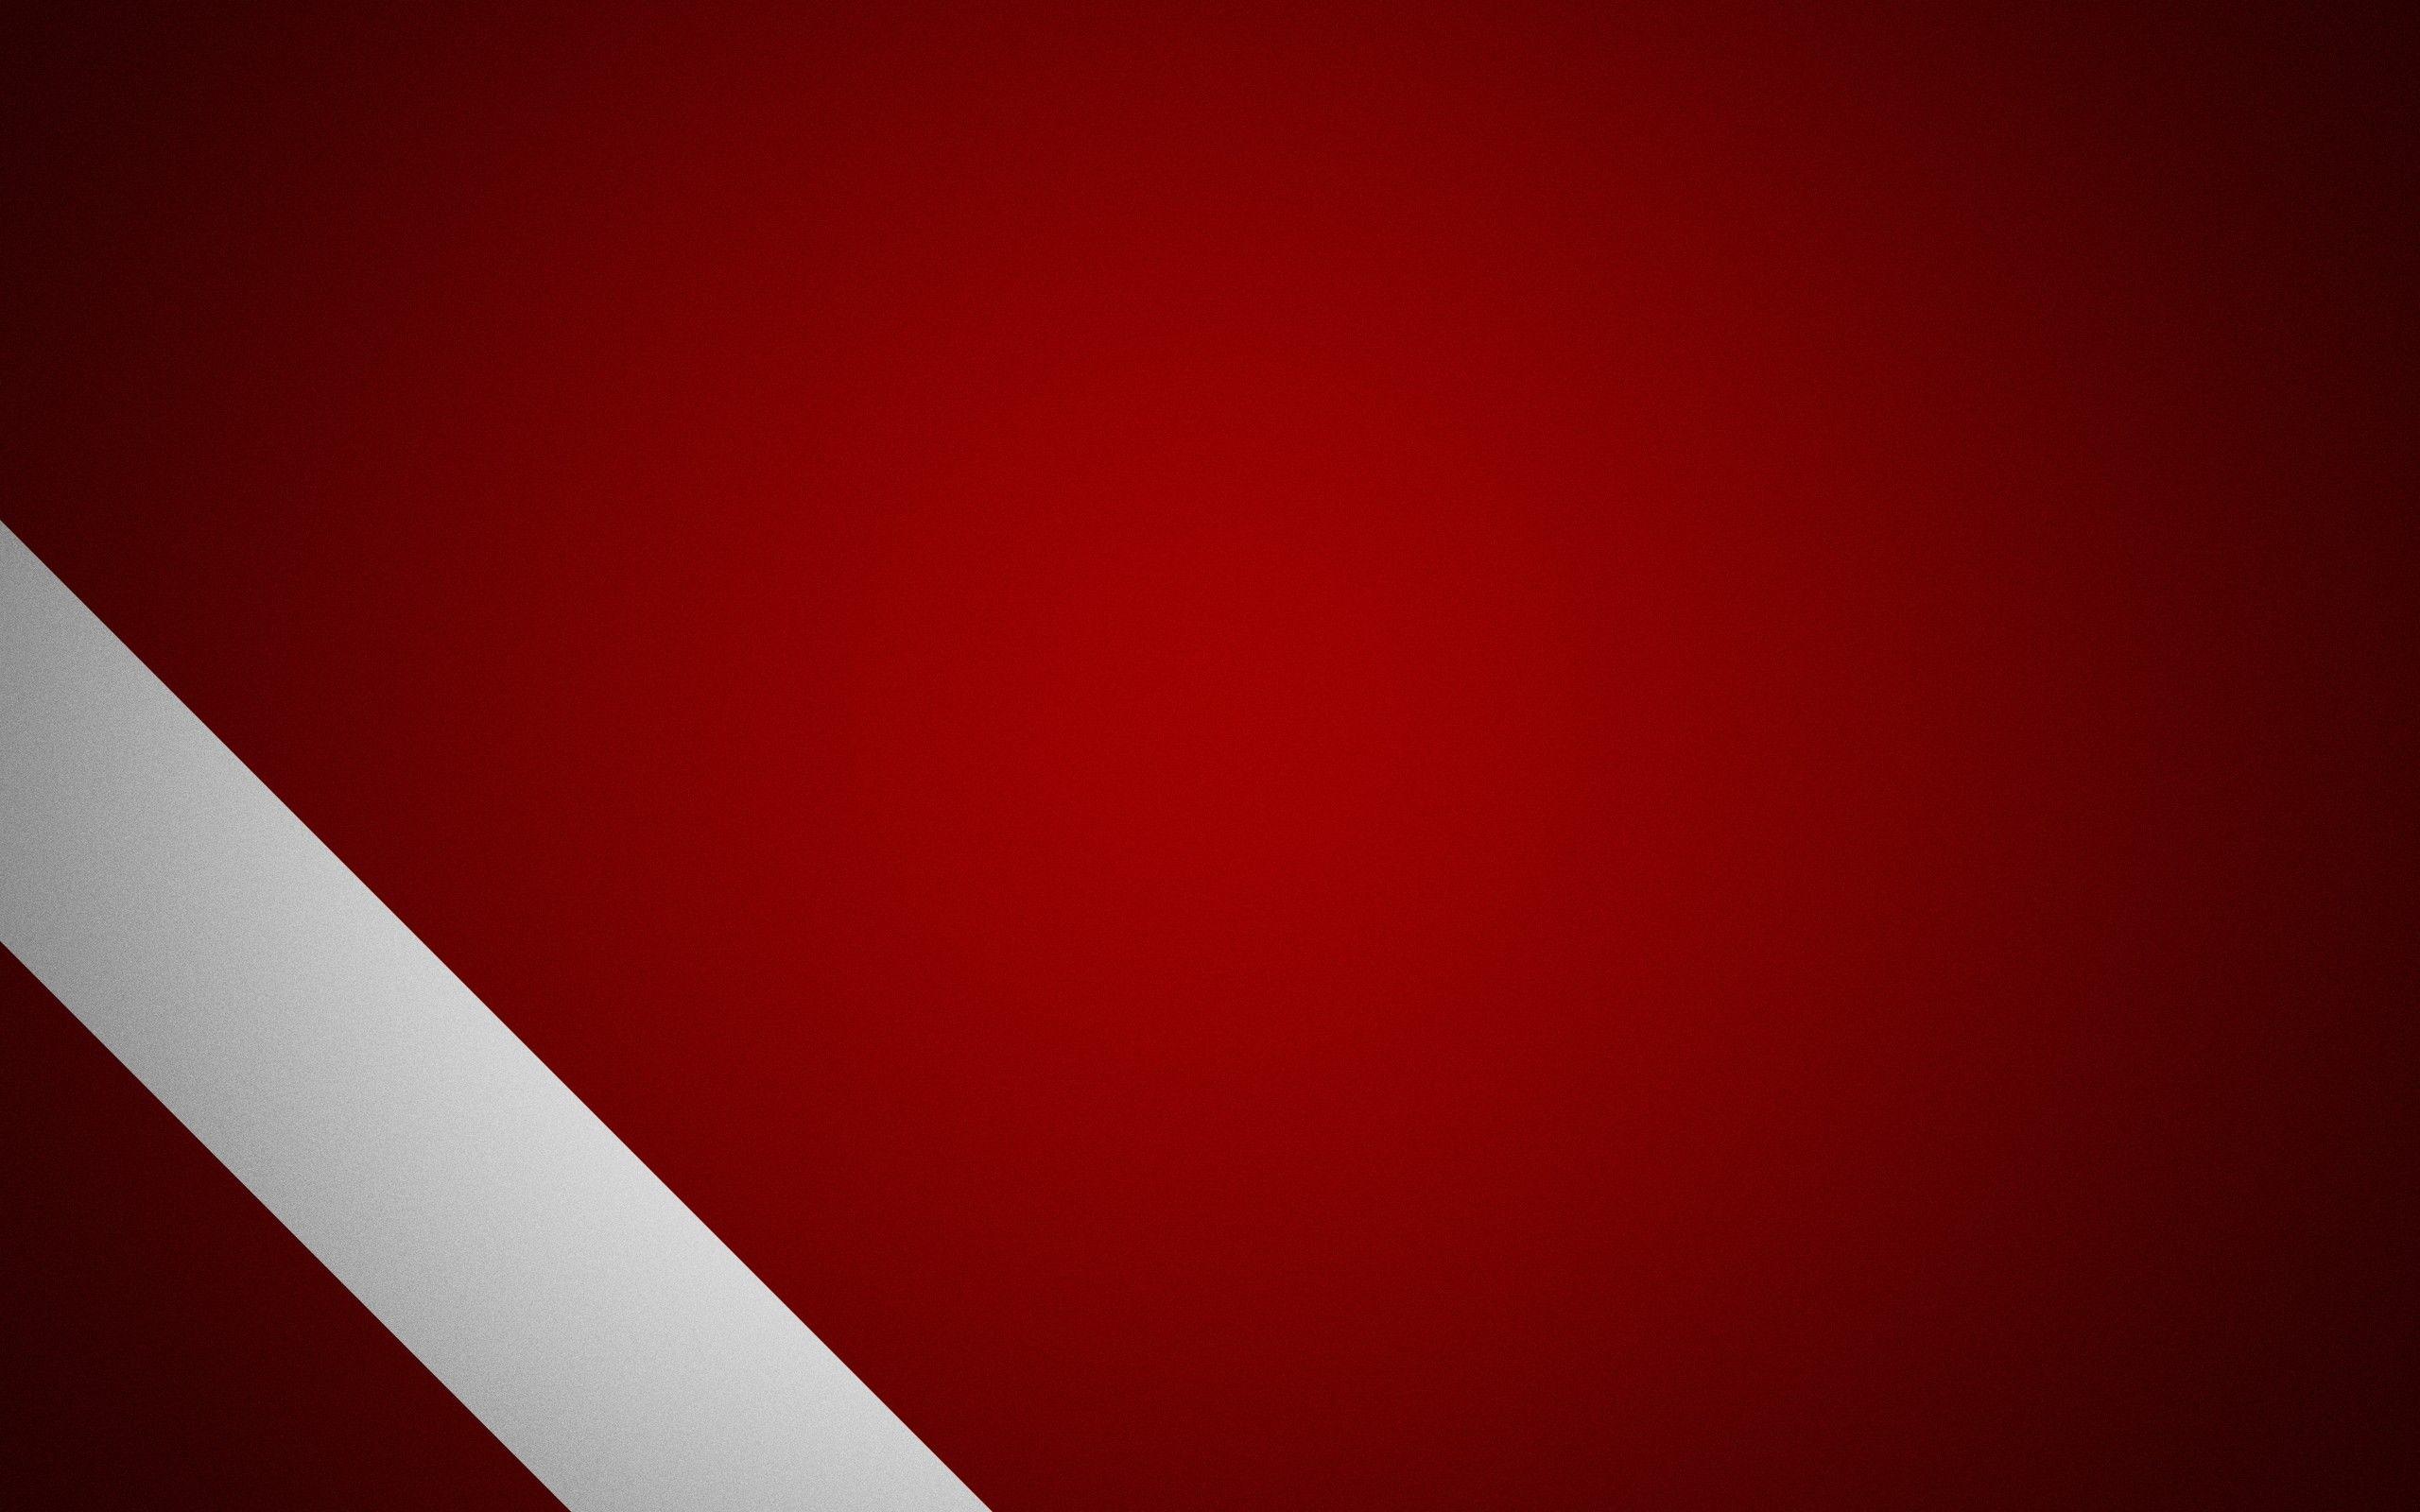 White and Red Wallpaper 27664 2560x1600 px